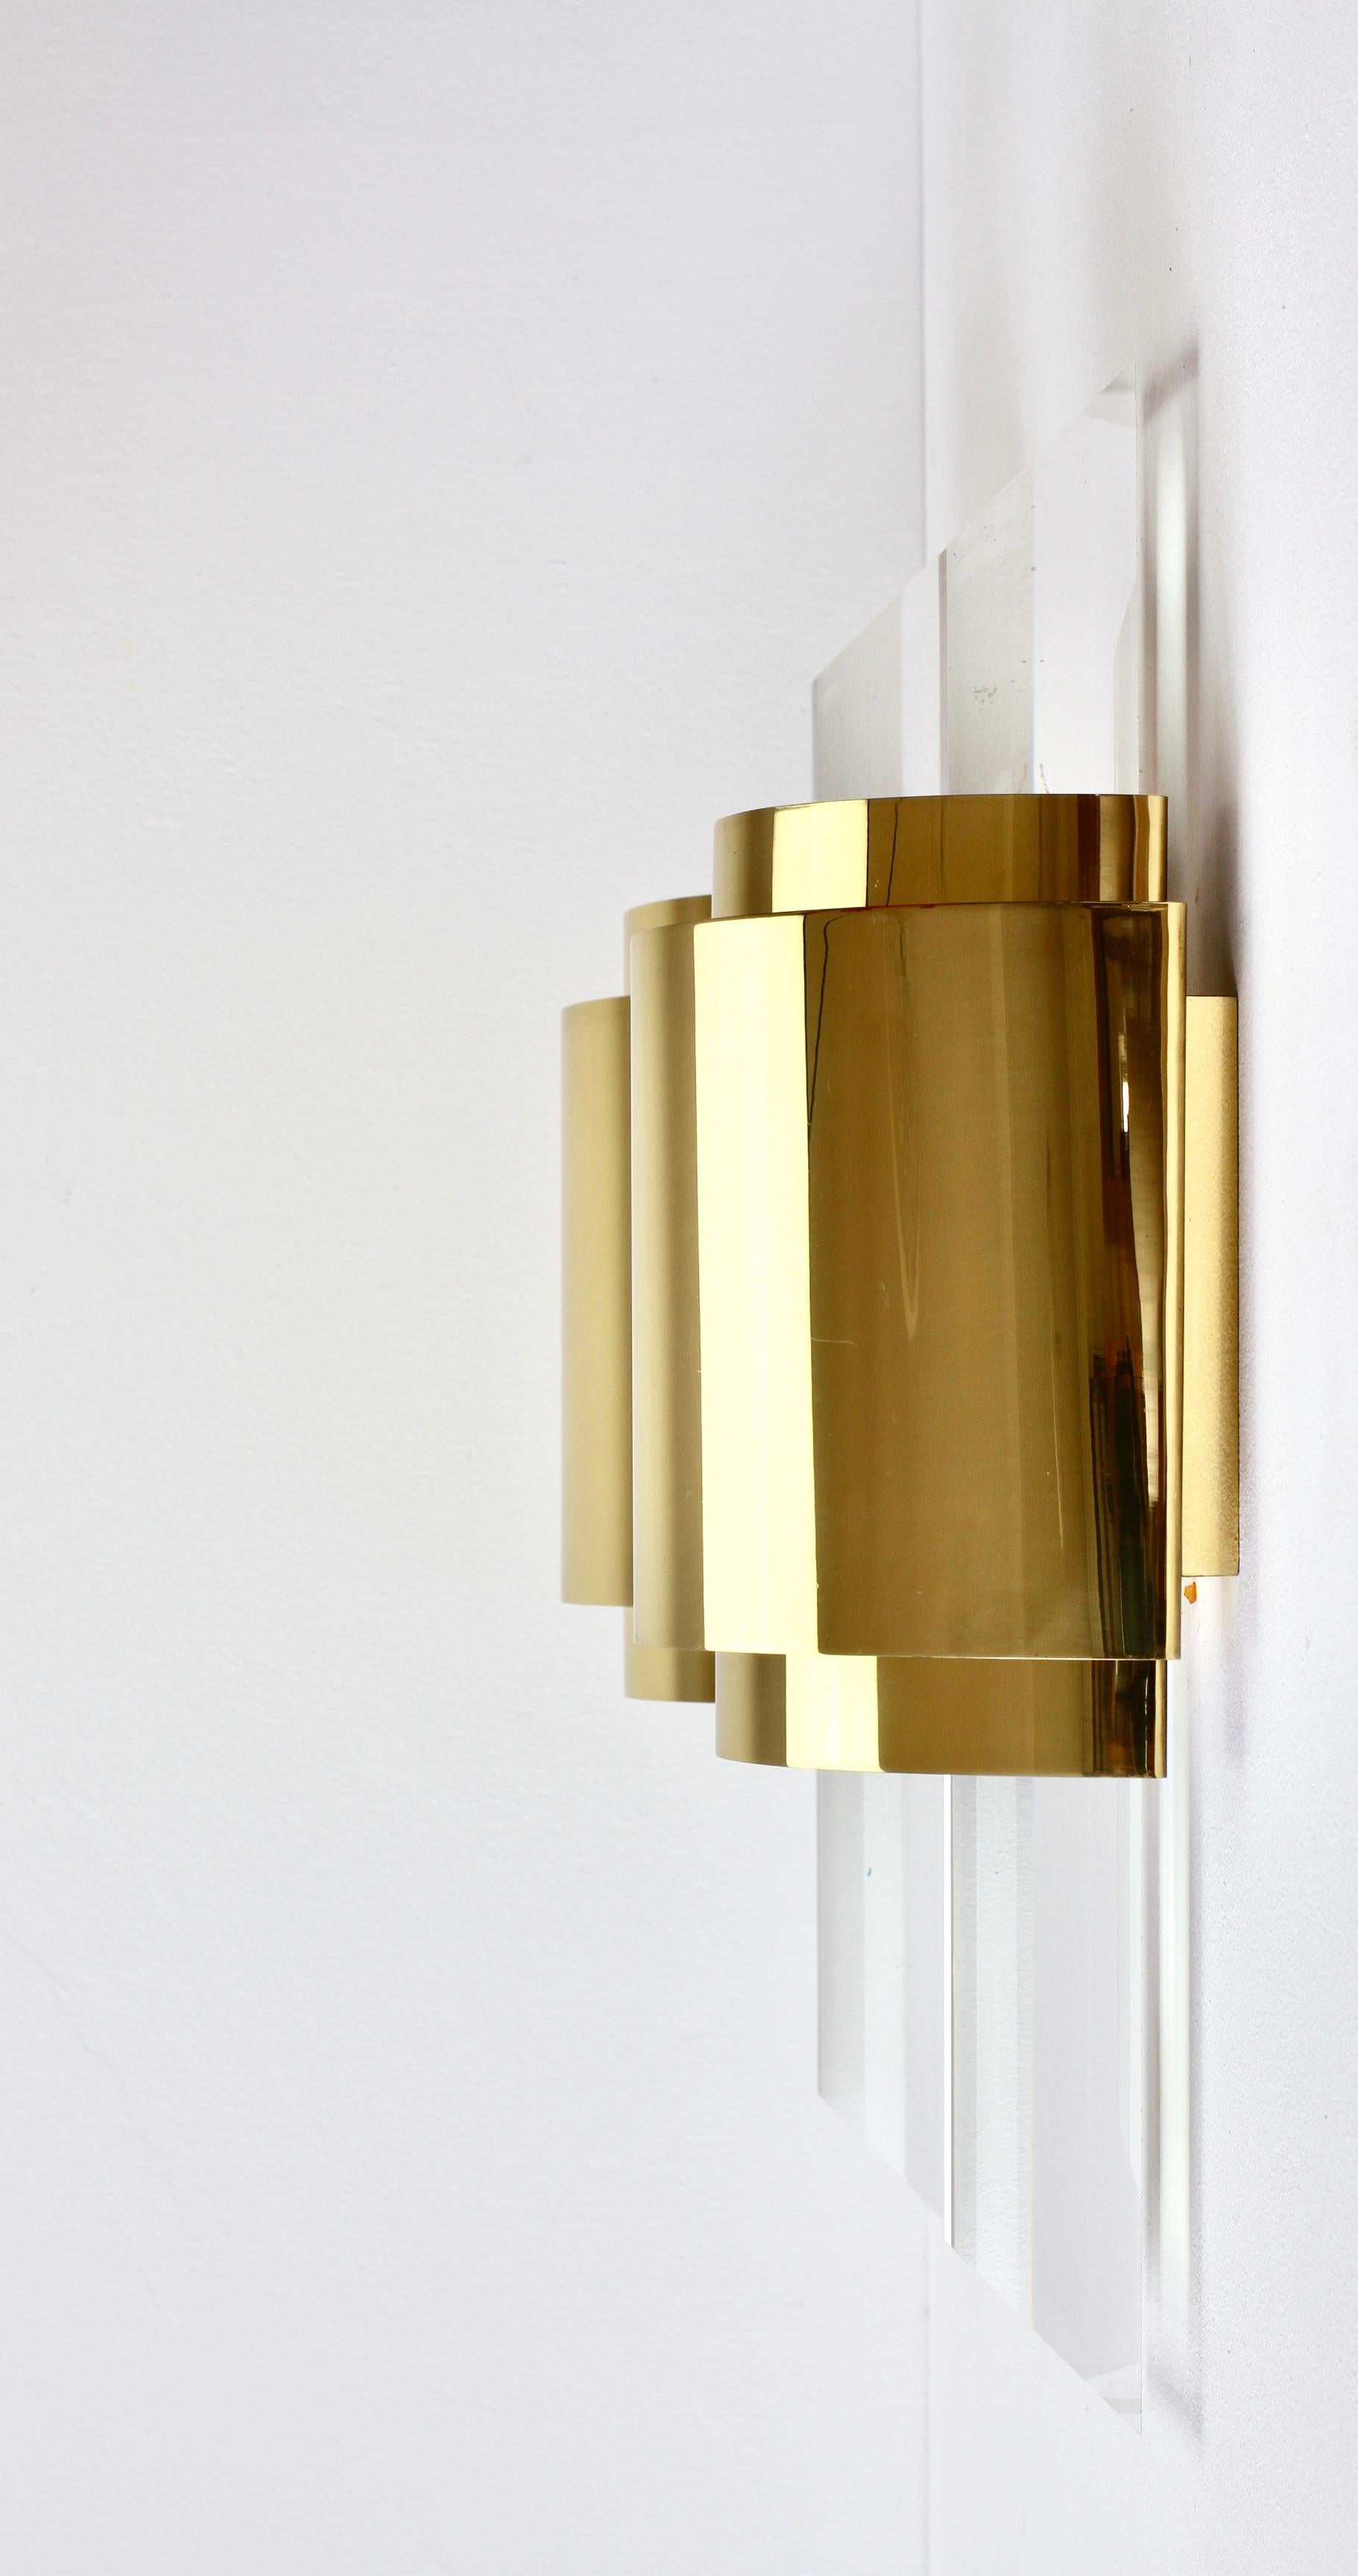 Polished Large Hollywood Regency Lucite and Brass Wall Lights or Sconces, circa 1970s For Sale